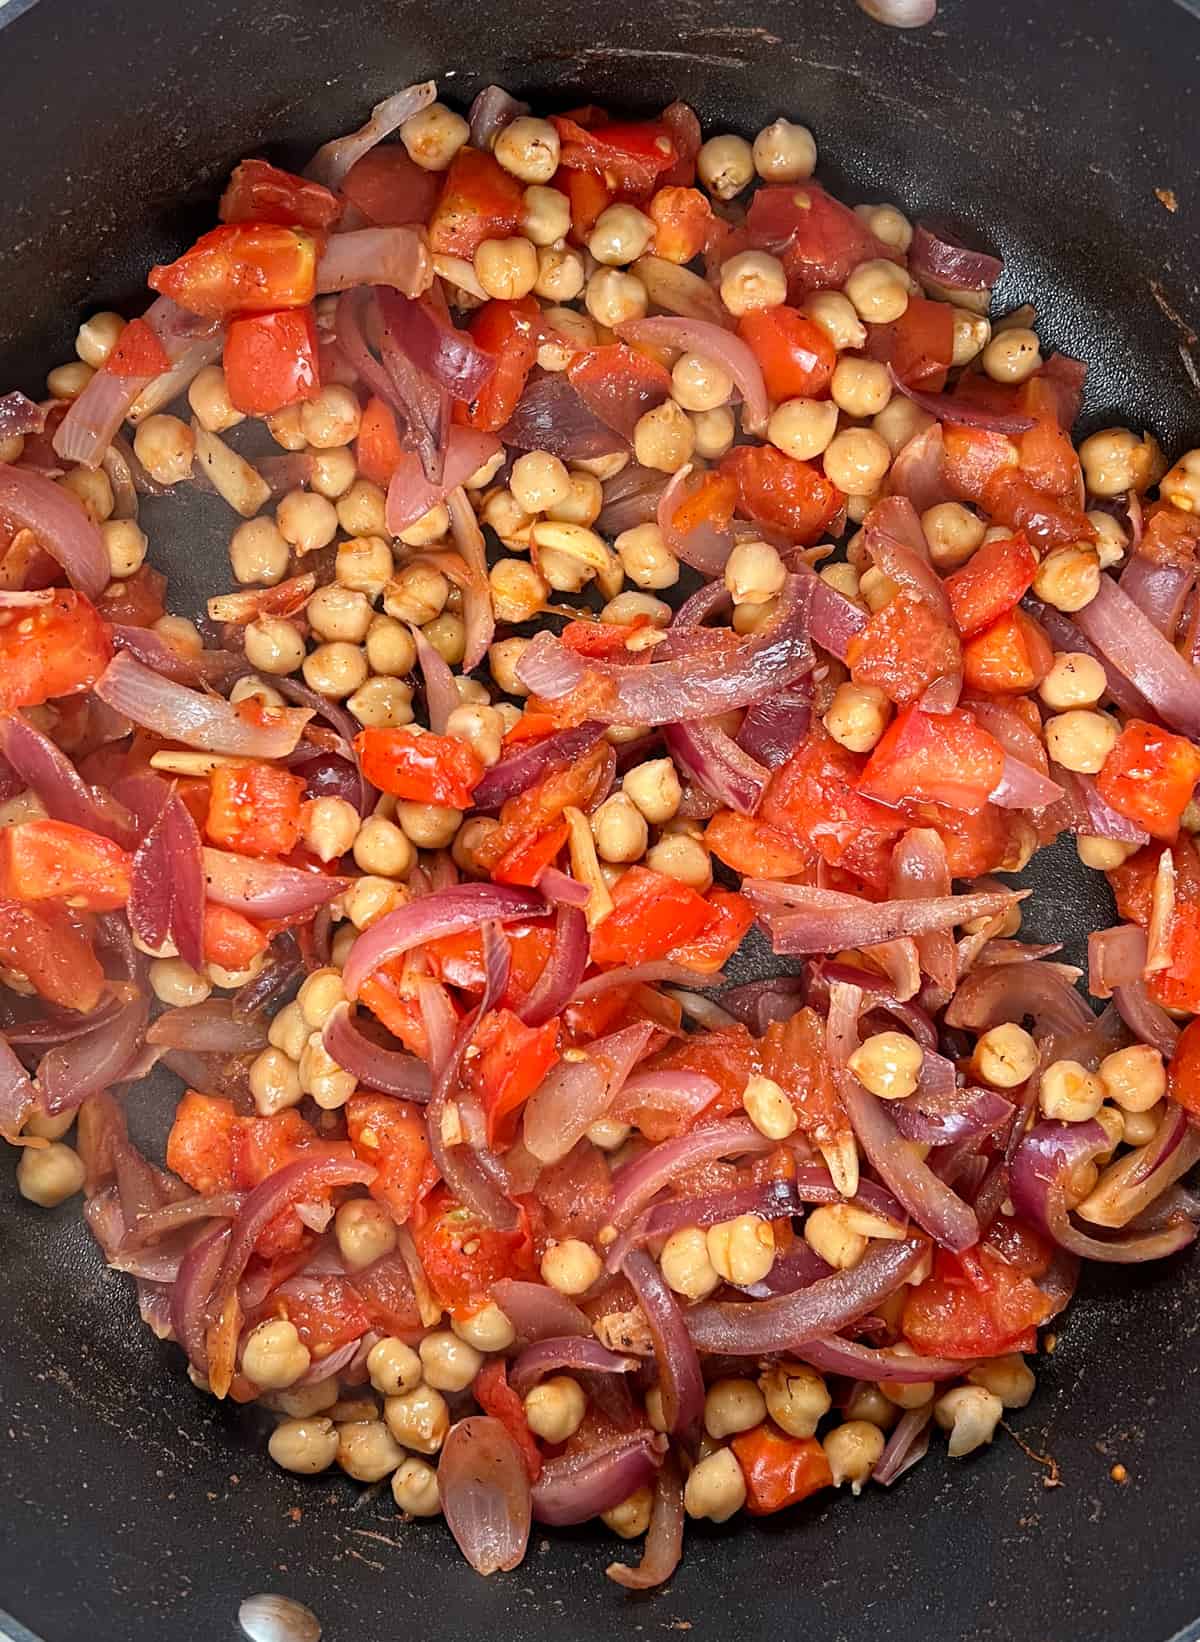 softened diced tomato, chickpeas, red onion slices and garlic slices in a black pan